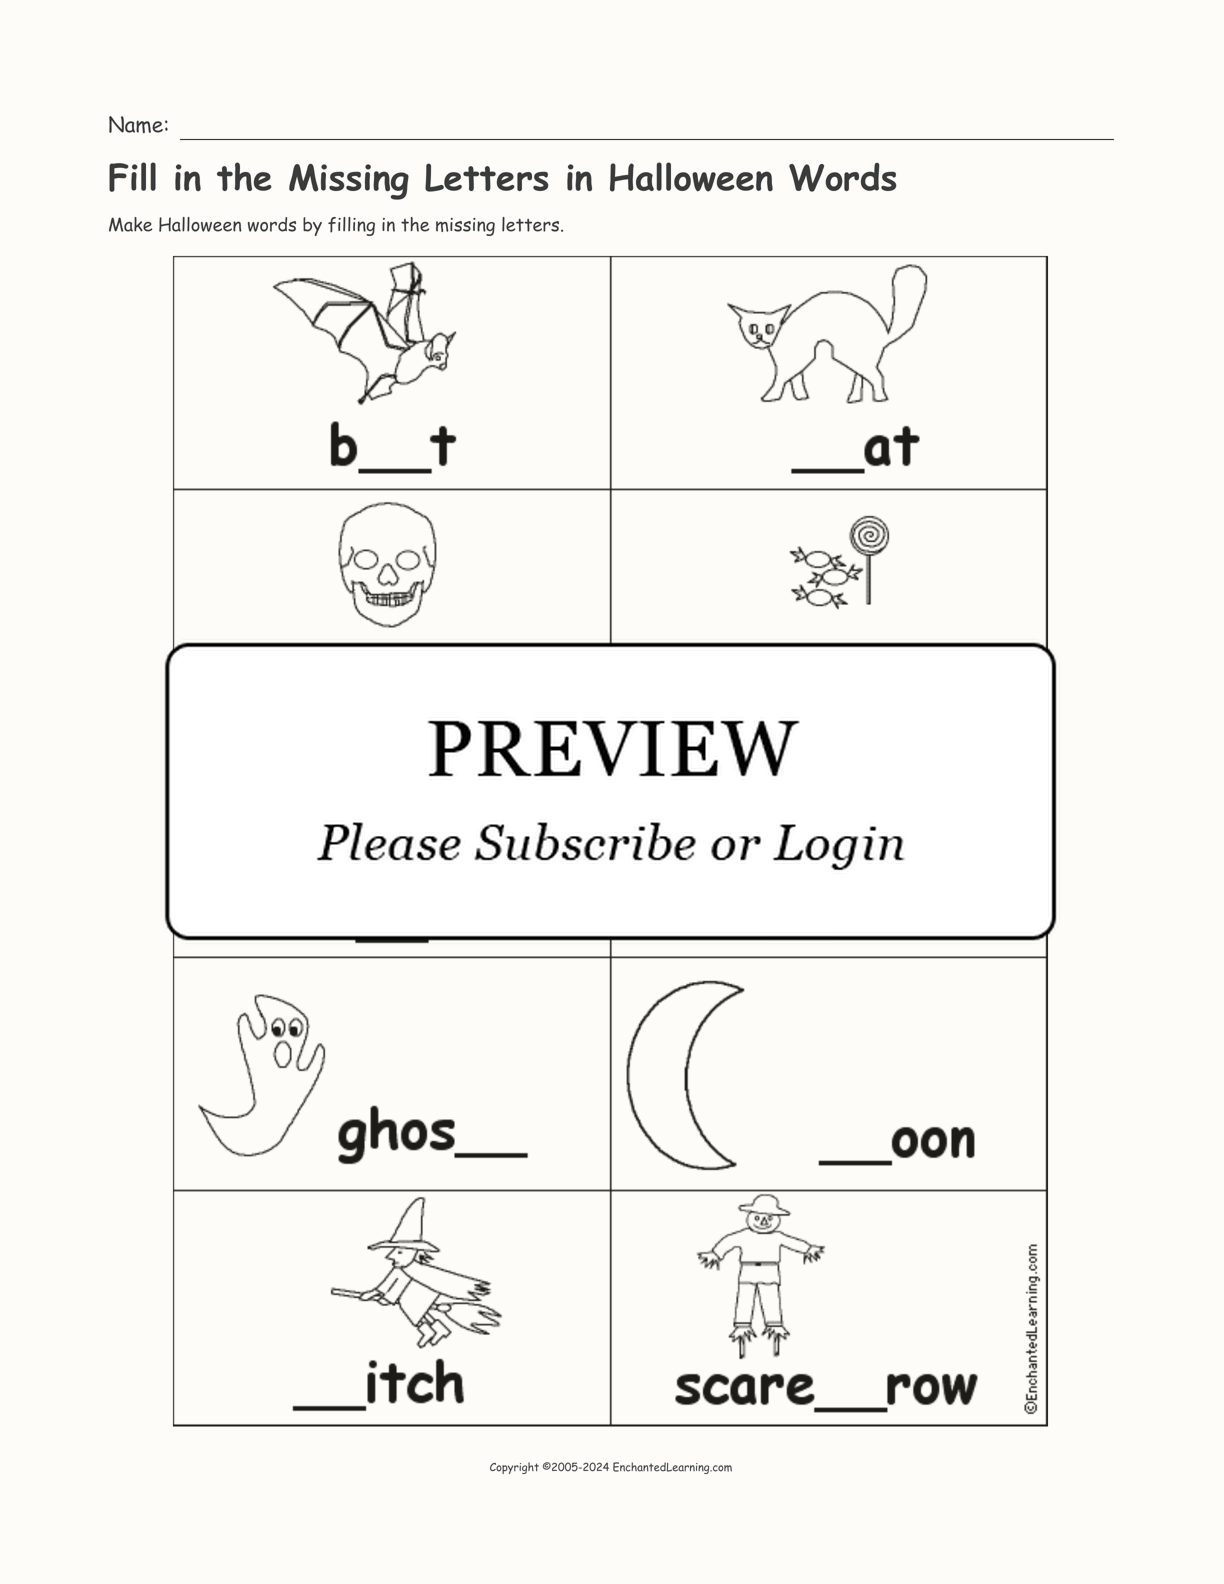 Fill in the Missing Letters in Halloween Words interactive worksheet page 1